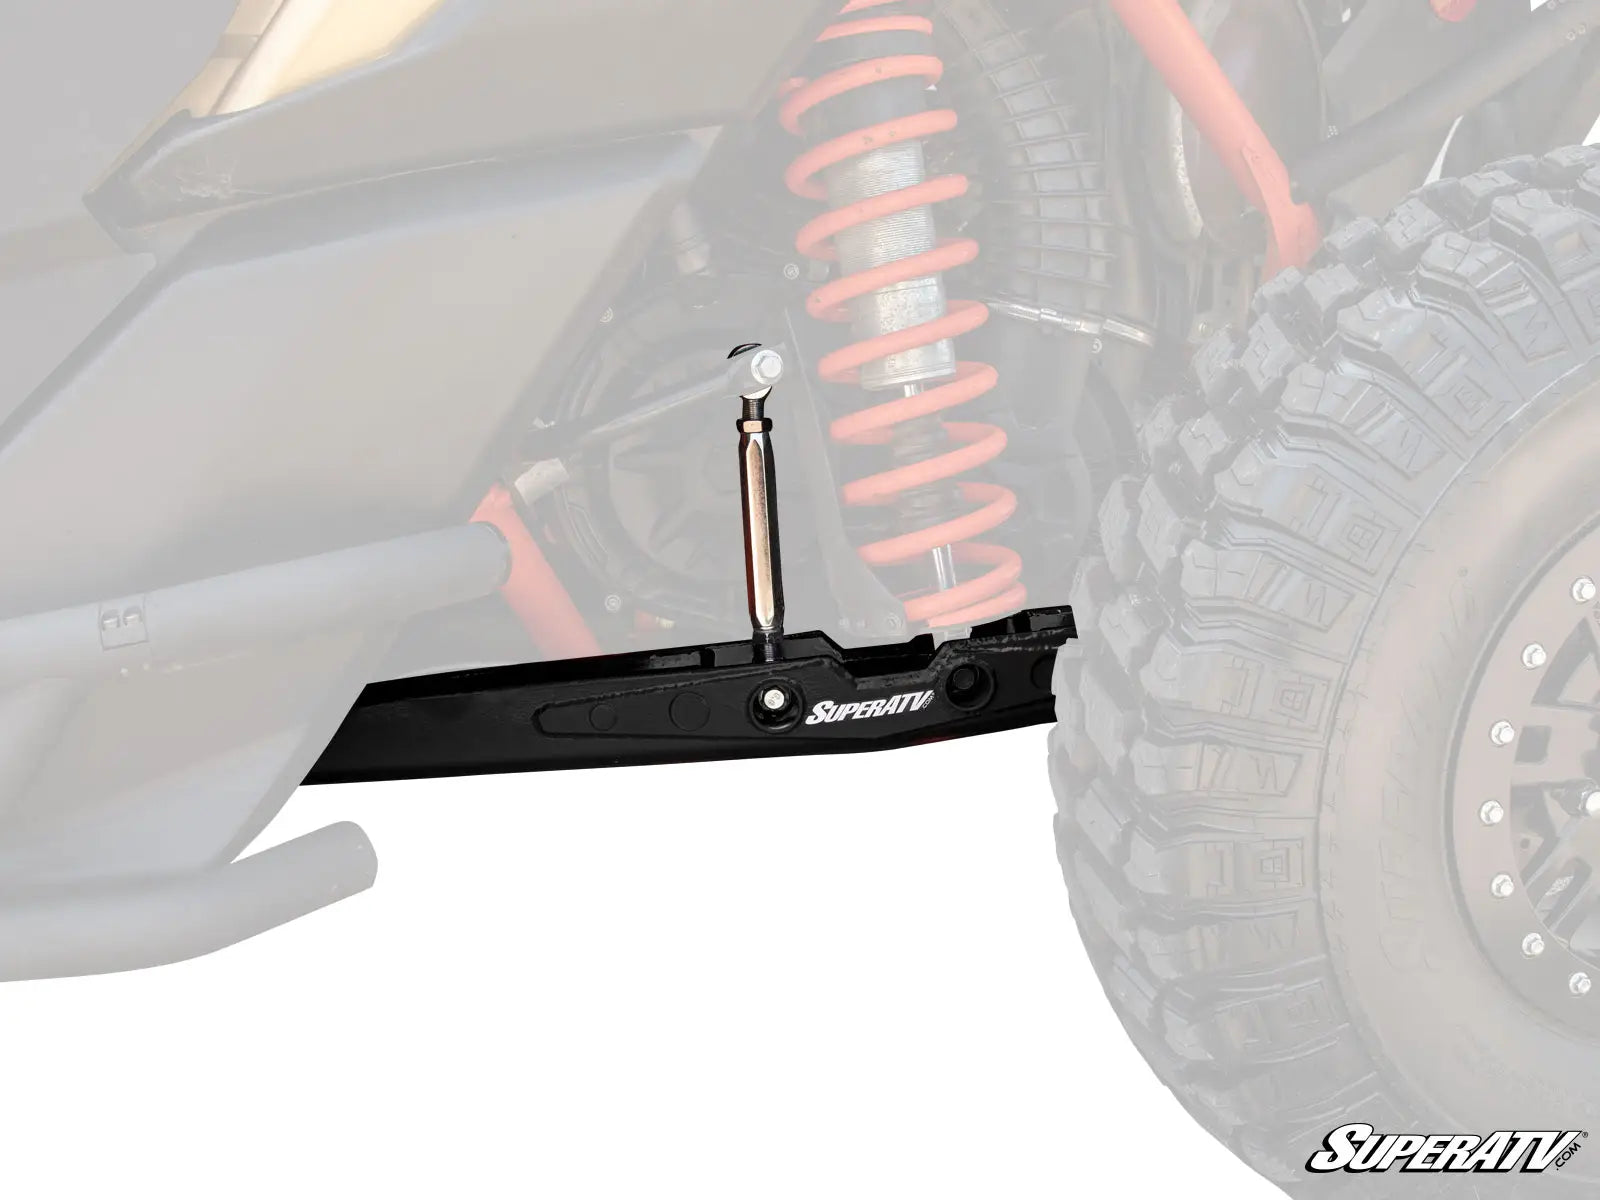 REAR TRAILING ARMS  for CAN-AM MAVERICK X3 72